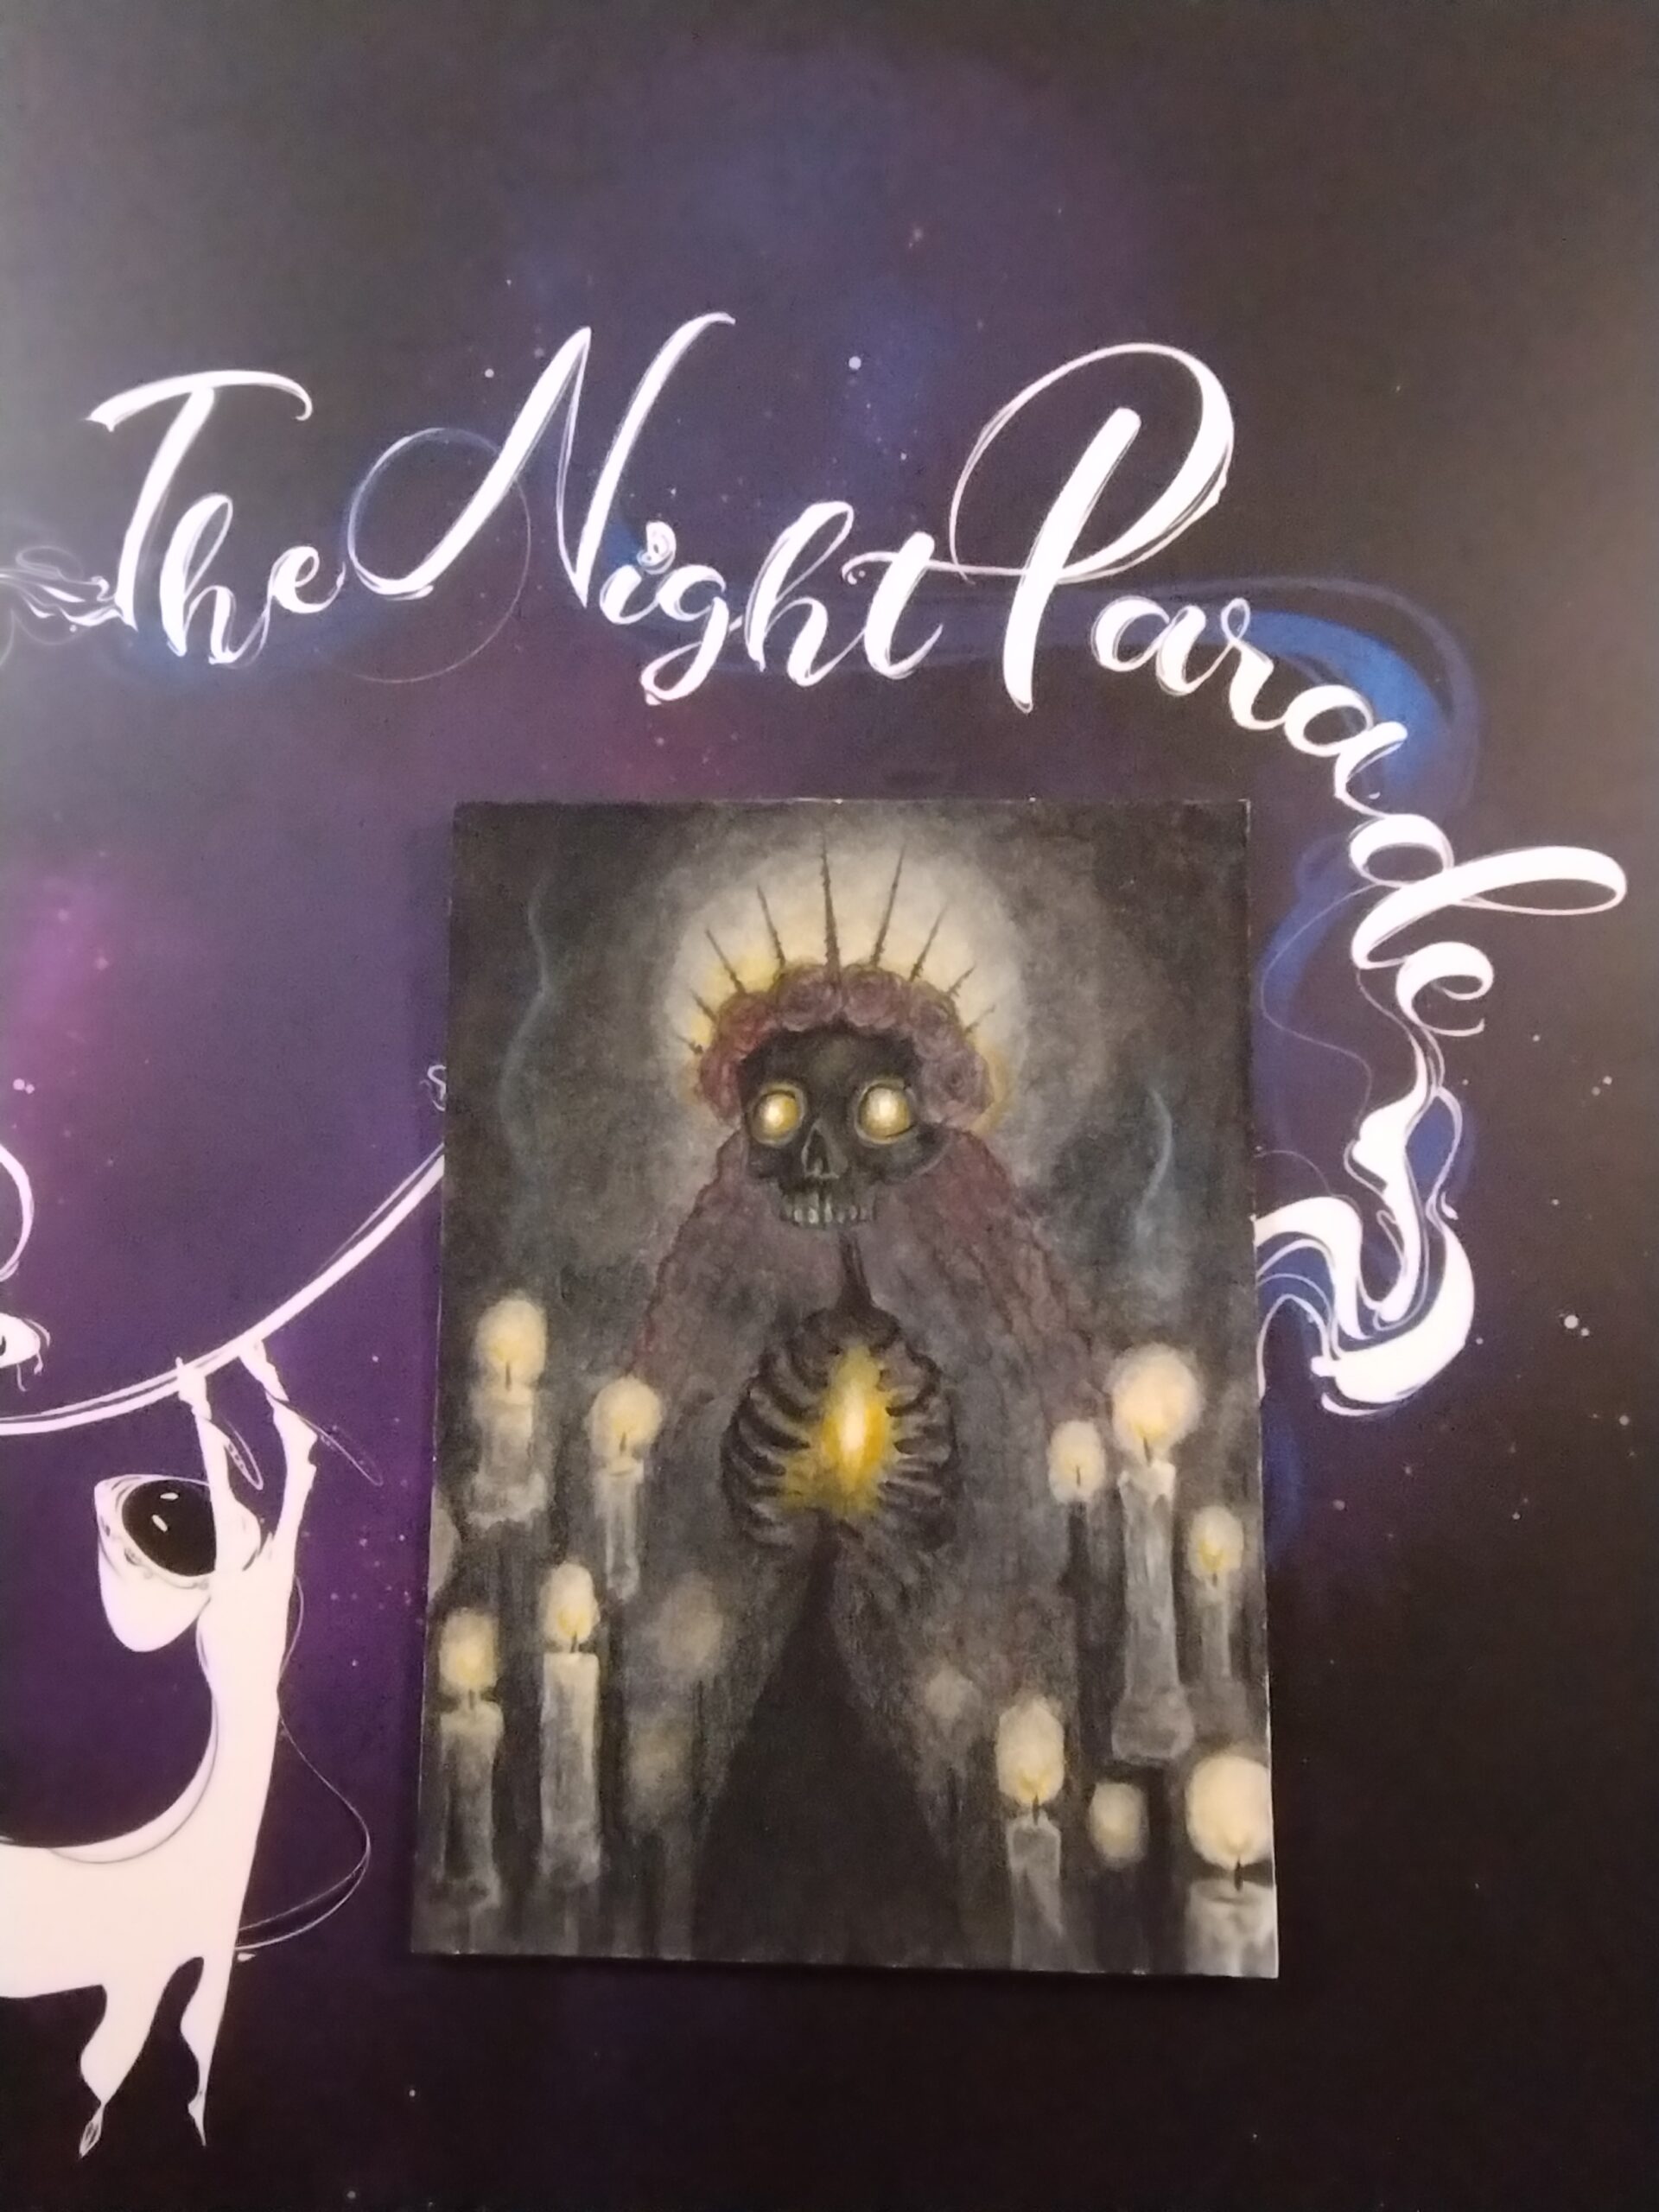 Art by Elisabeth Ann Marie with The Night Parade written above in curling white script on a purple celestial background.